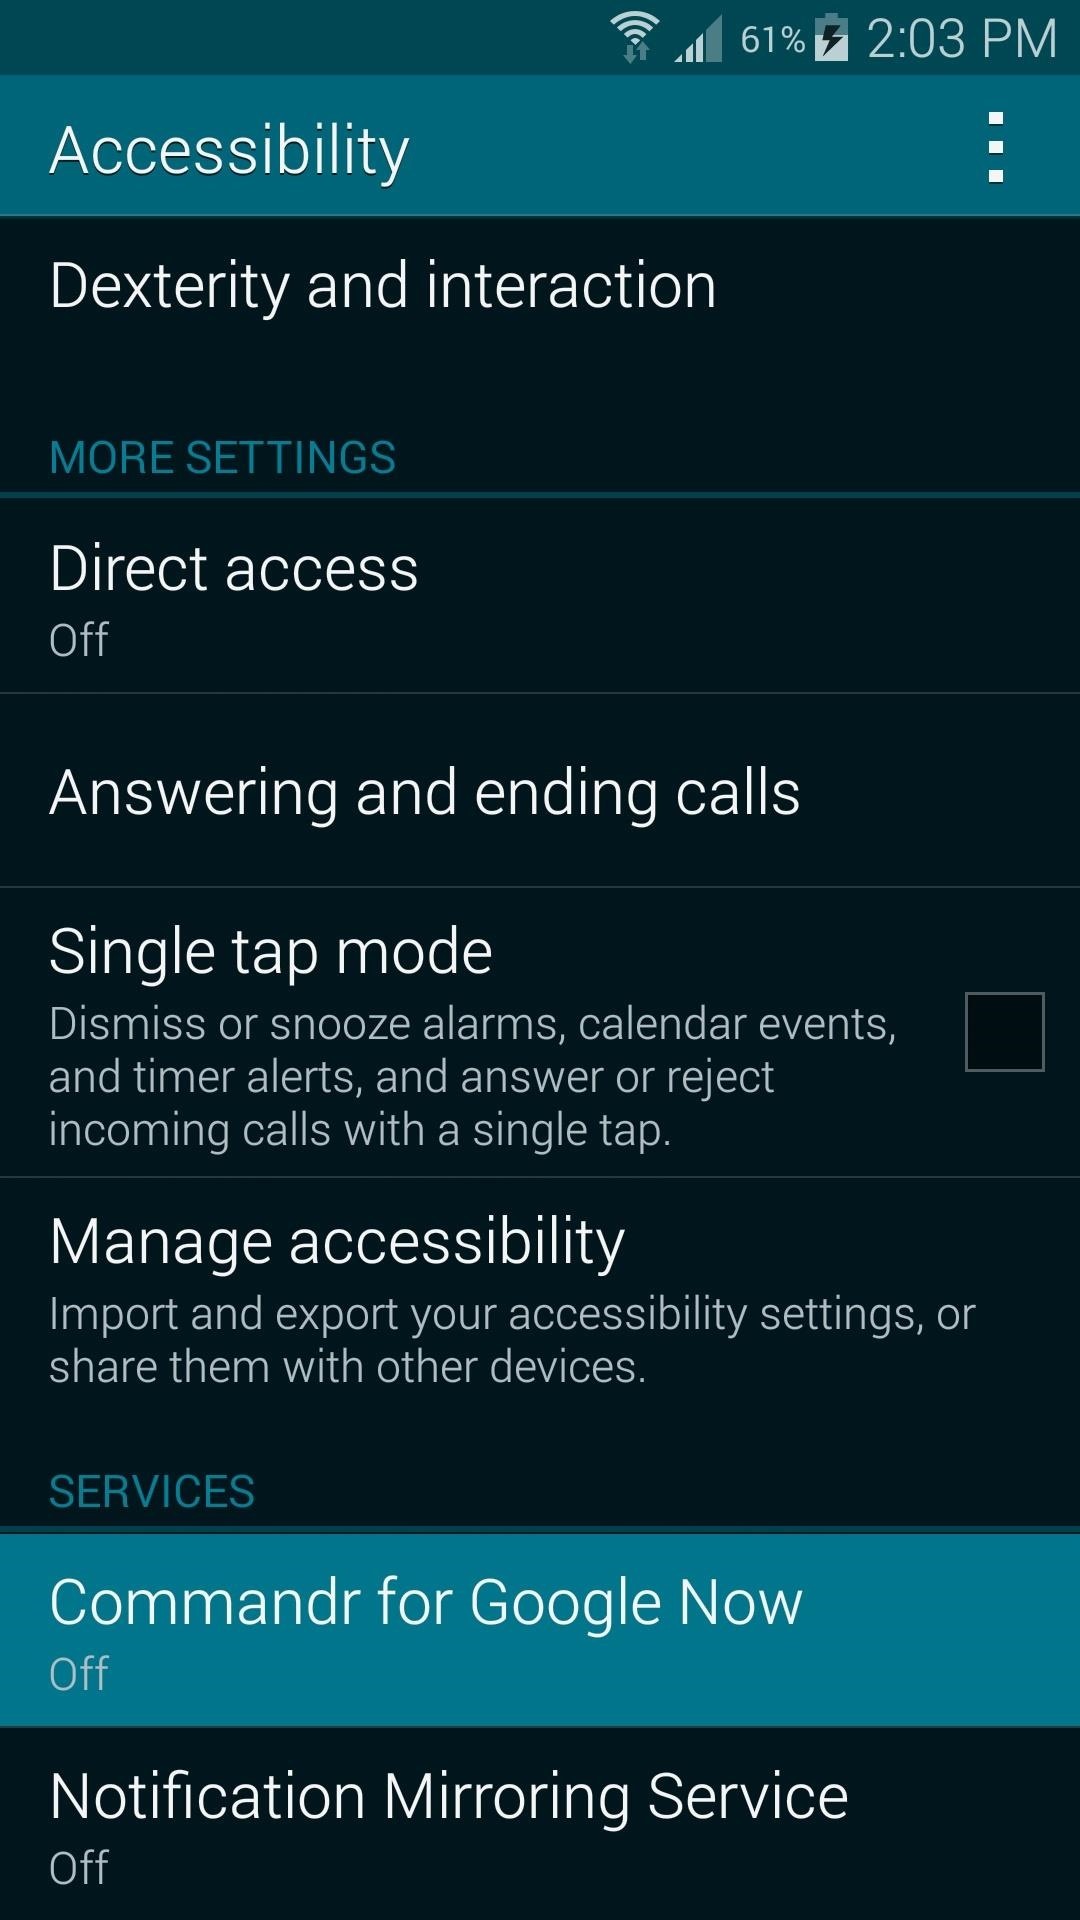 How to Fully Control Your Galaxy S5 with Google Now Commands—No Root Needed